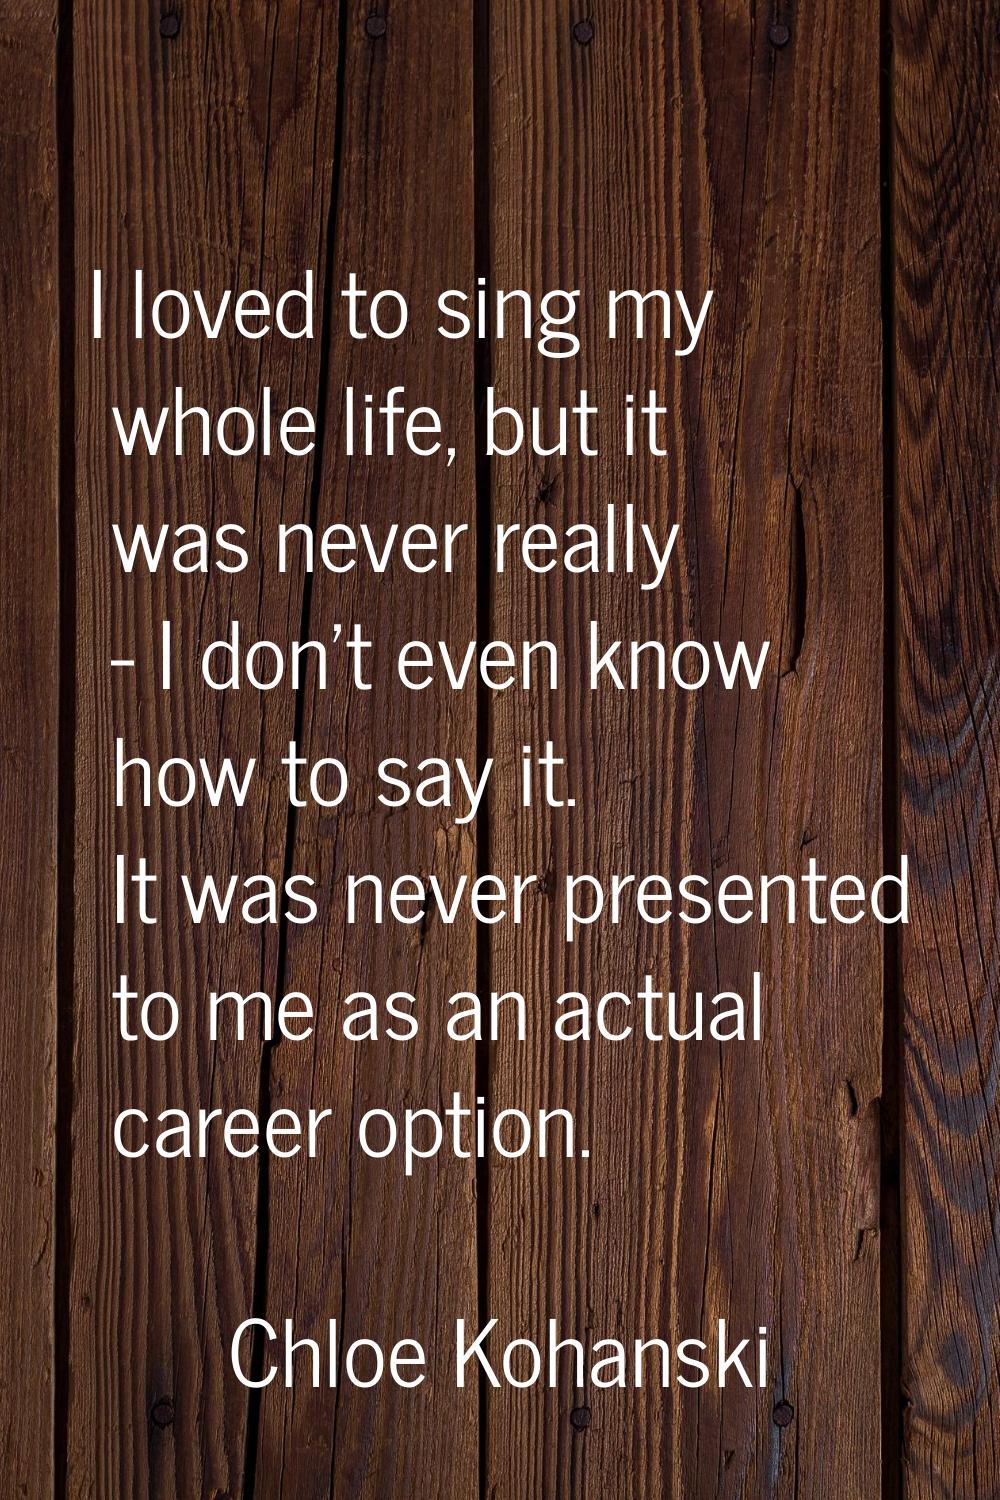 I loved to sing my whole life, but it was never really - I don't even know how to say it. It was ne